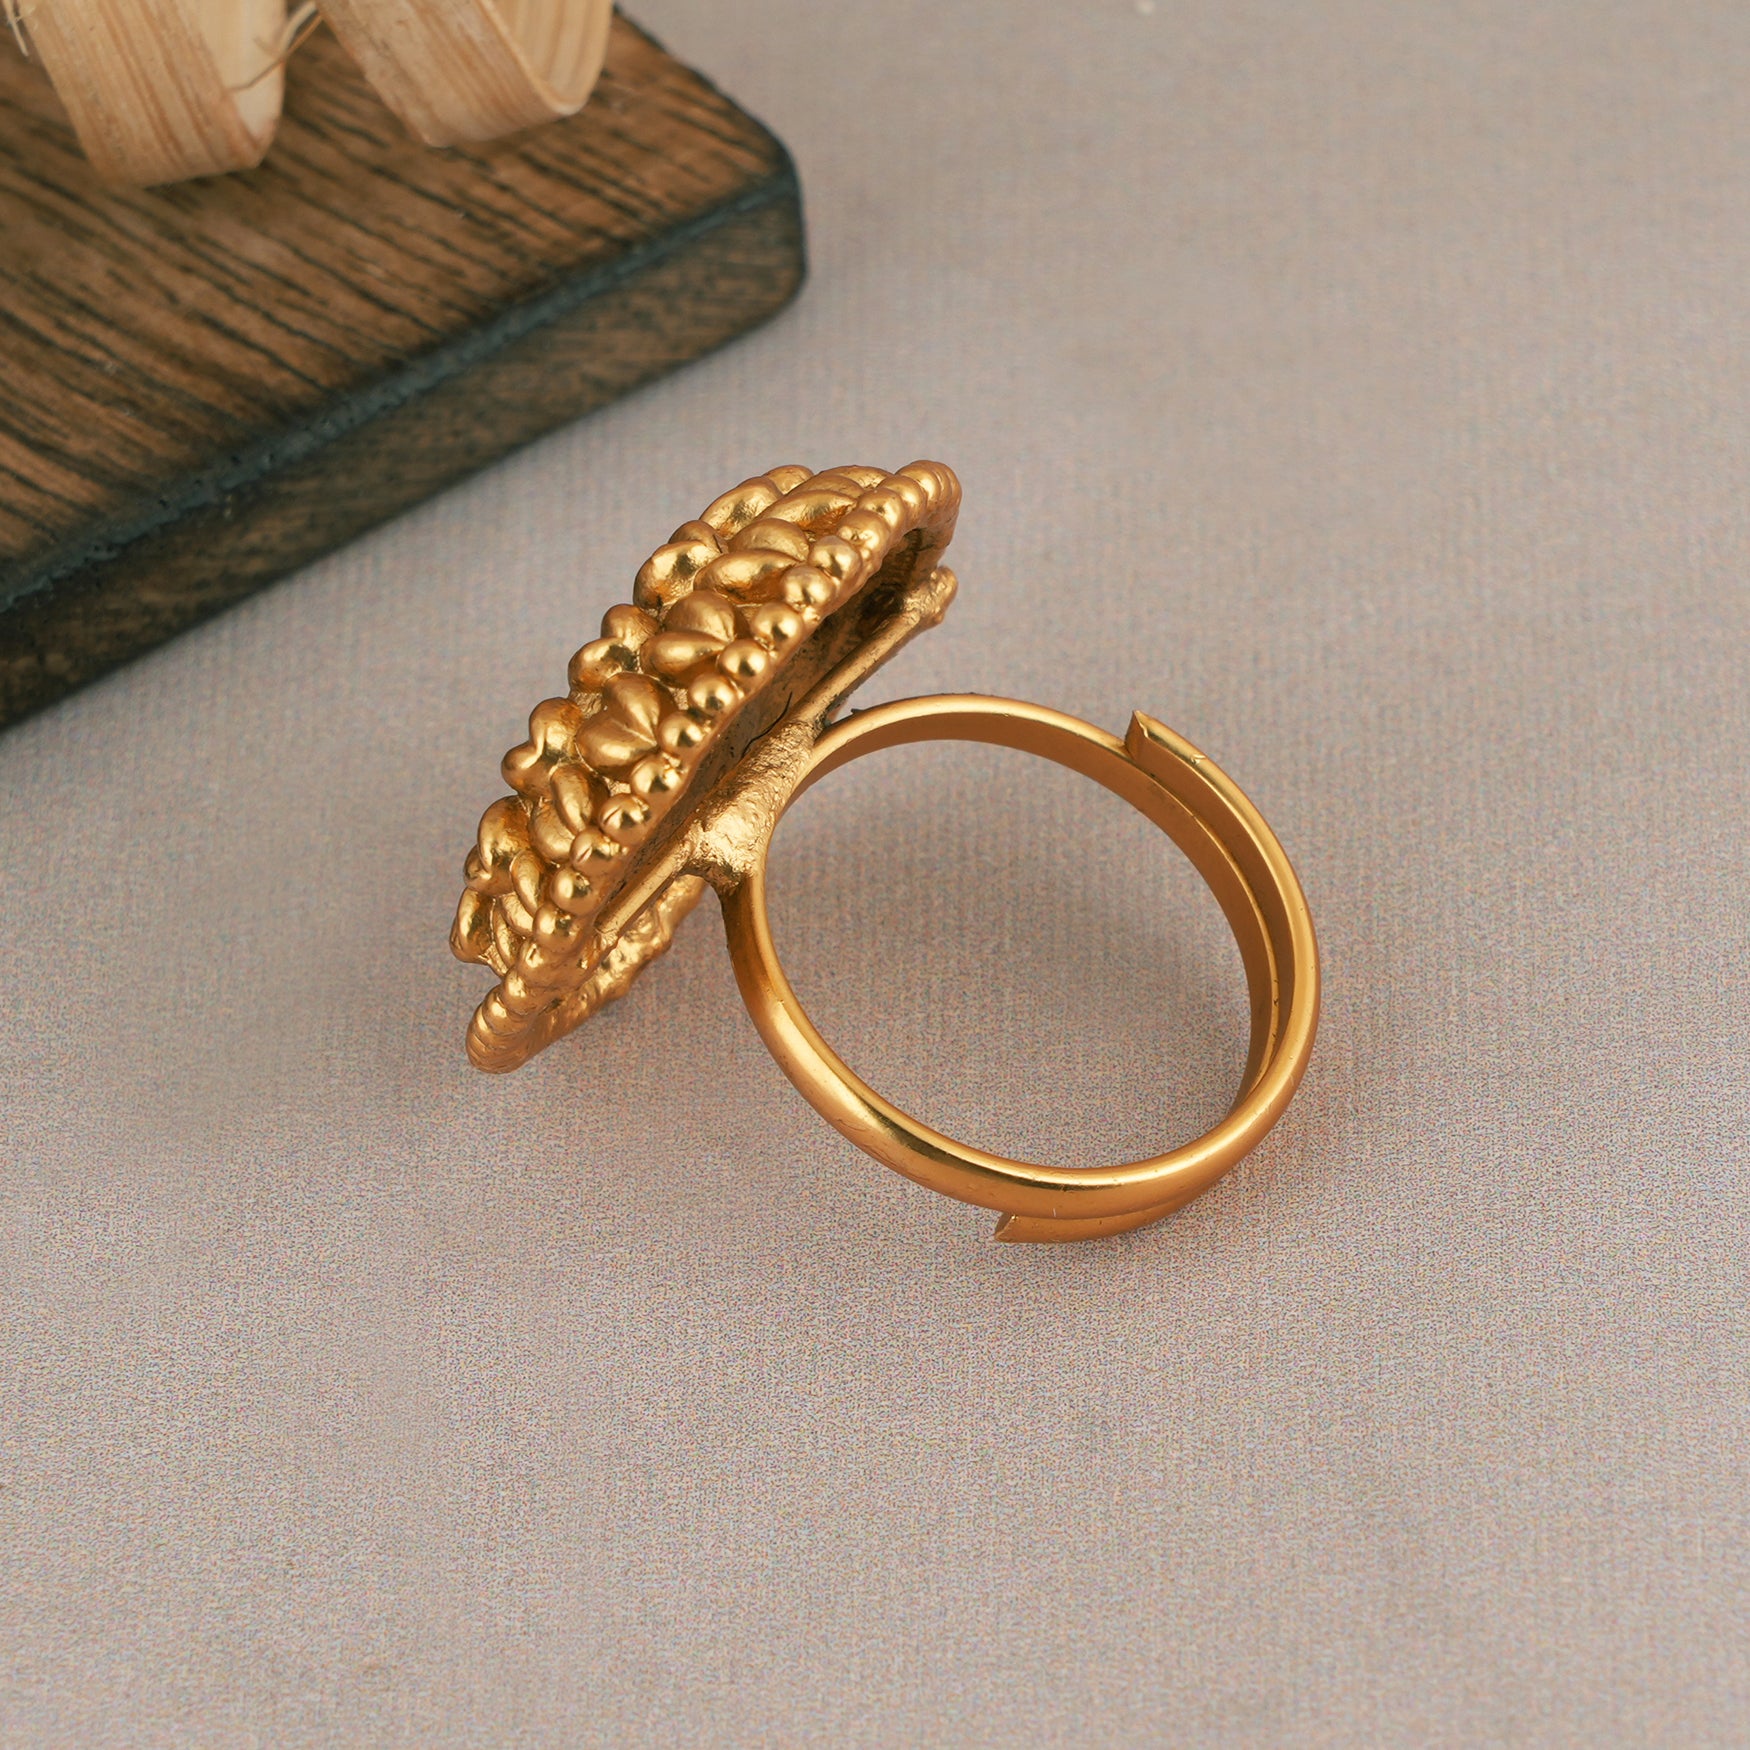 Cute antique gold adjustable ring for women